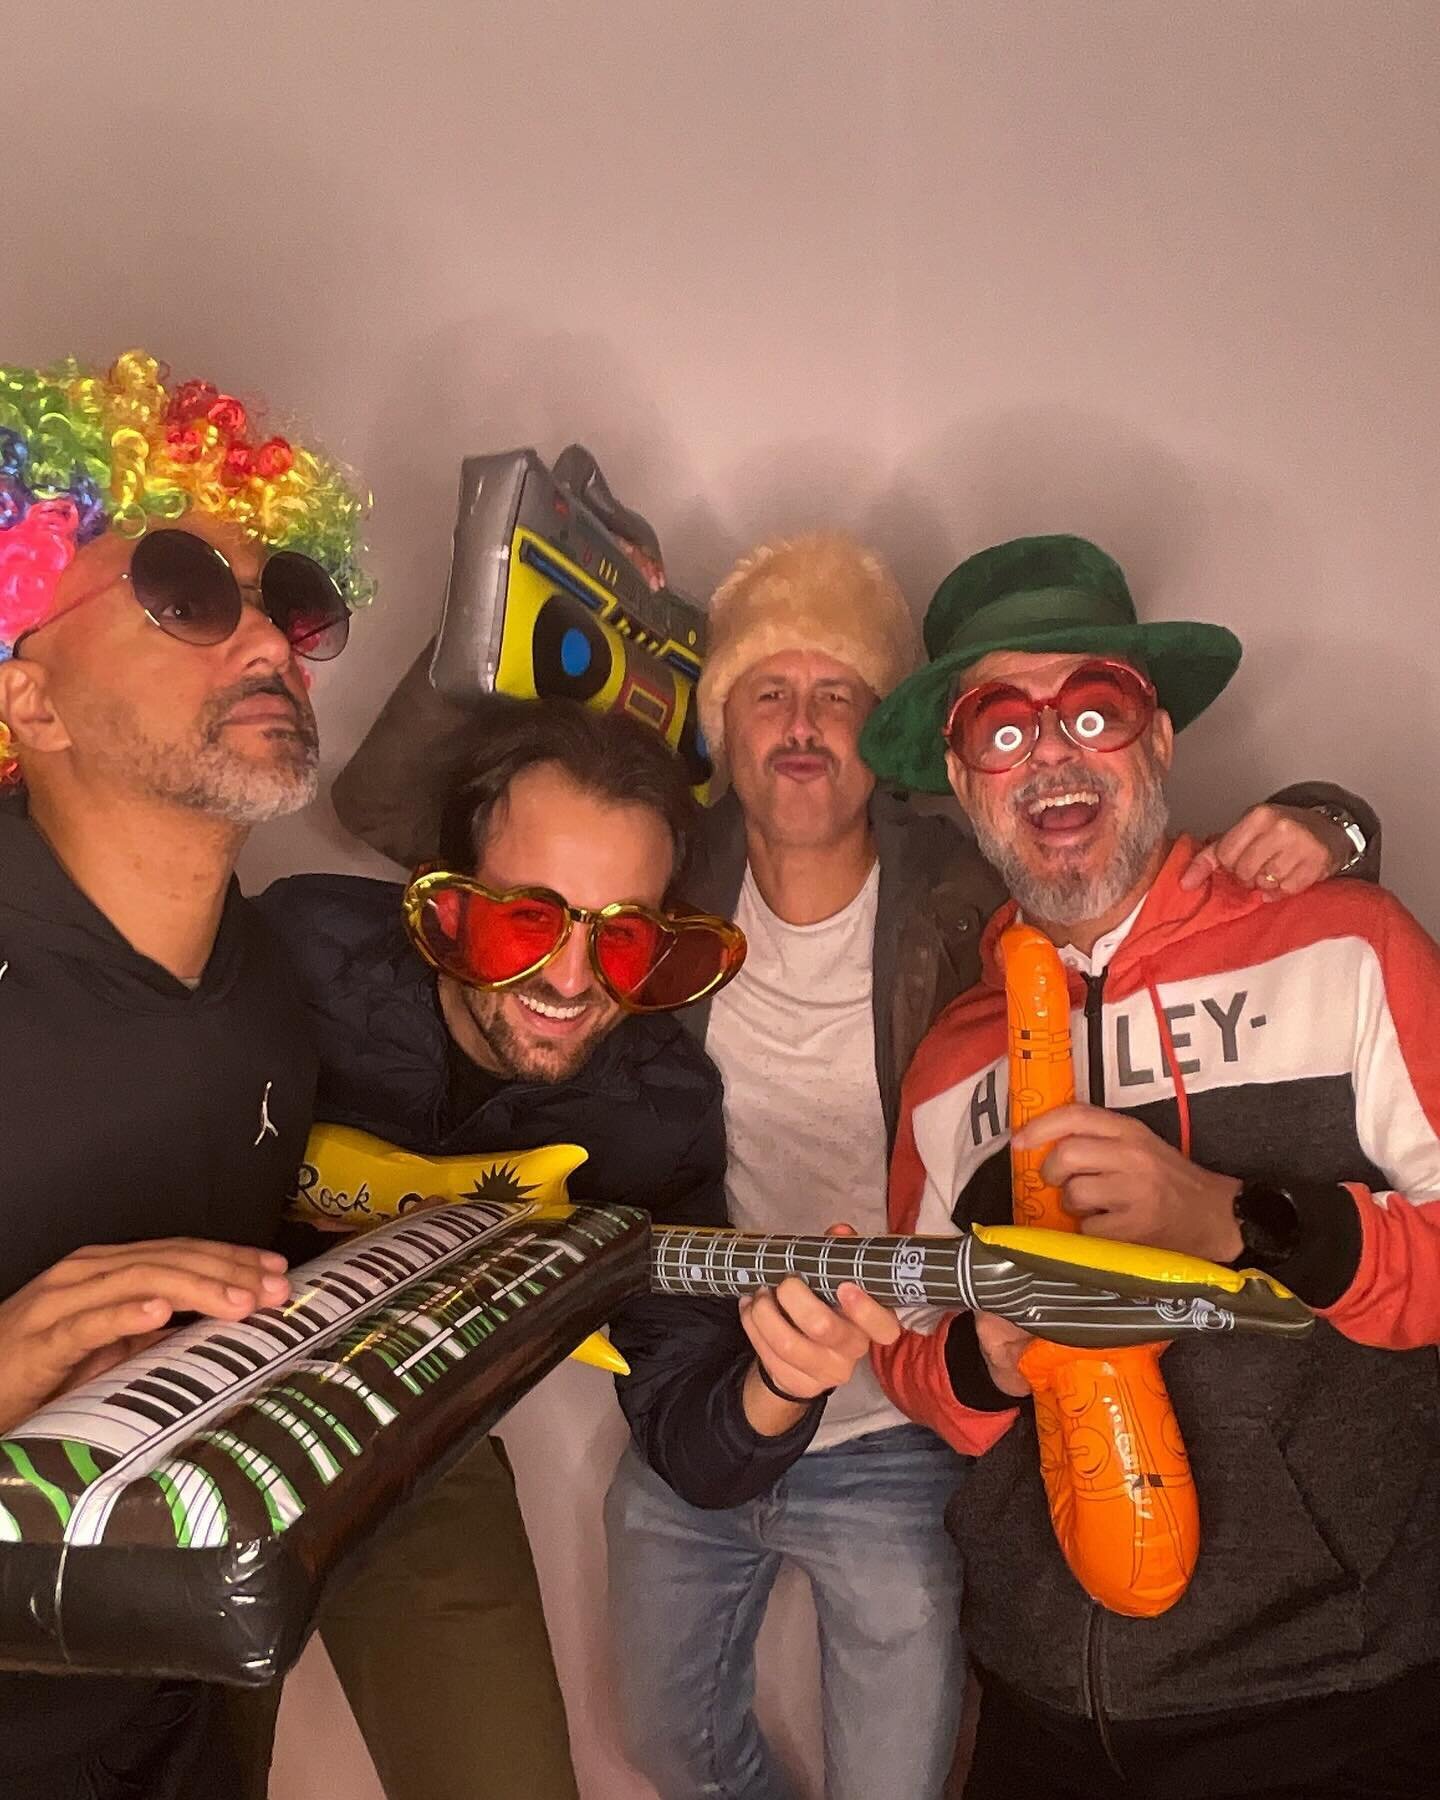 #tbt when the boys take over the Photo Booth! 🤪

#photobooth #picturefirstphotobooth #photoboothportland